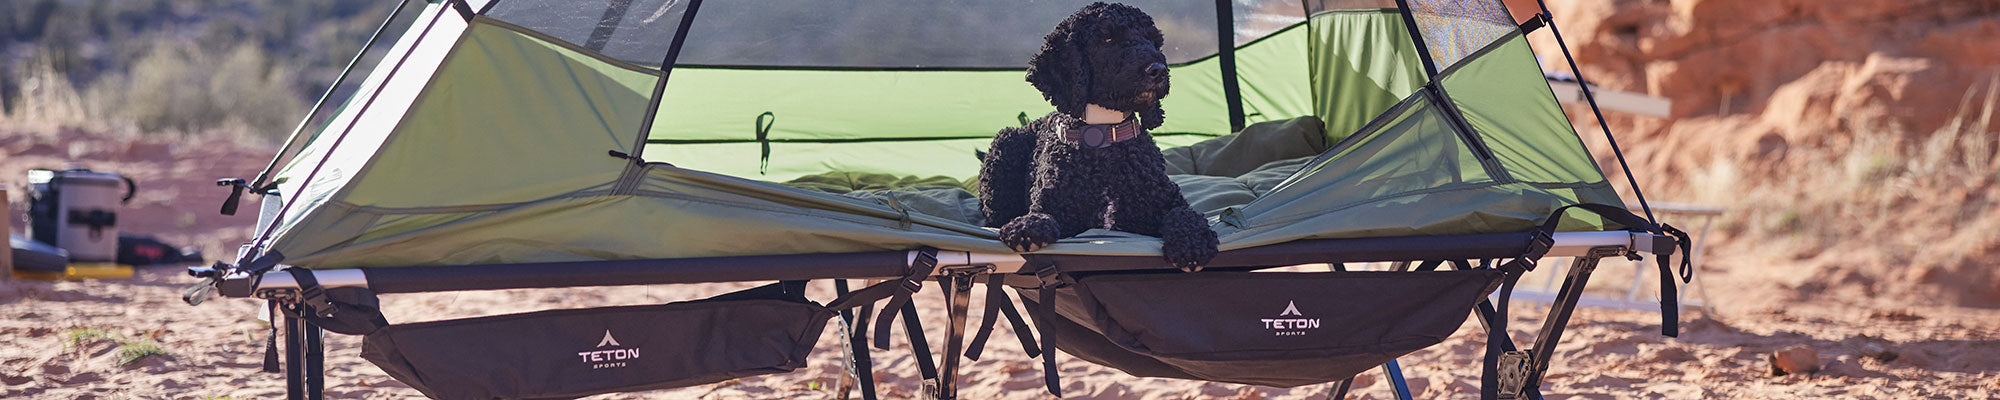 A dog is seen in a Vista tent setup on top of the TETON Sports cots with the accessories attached.